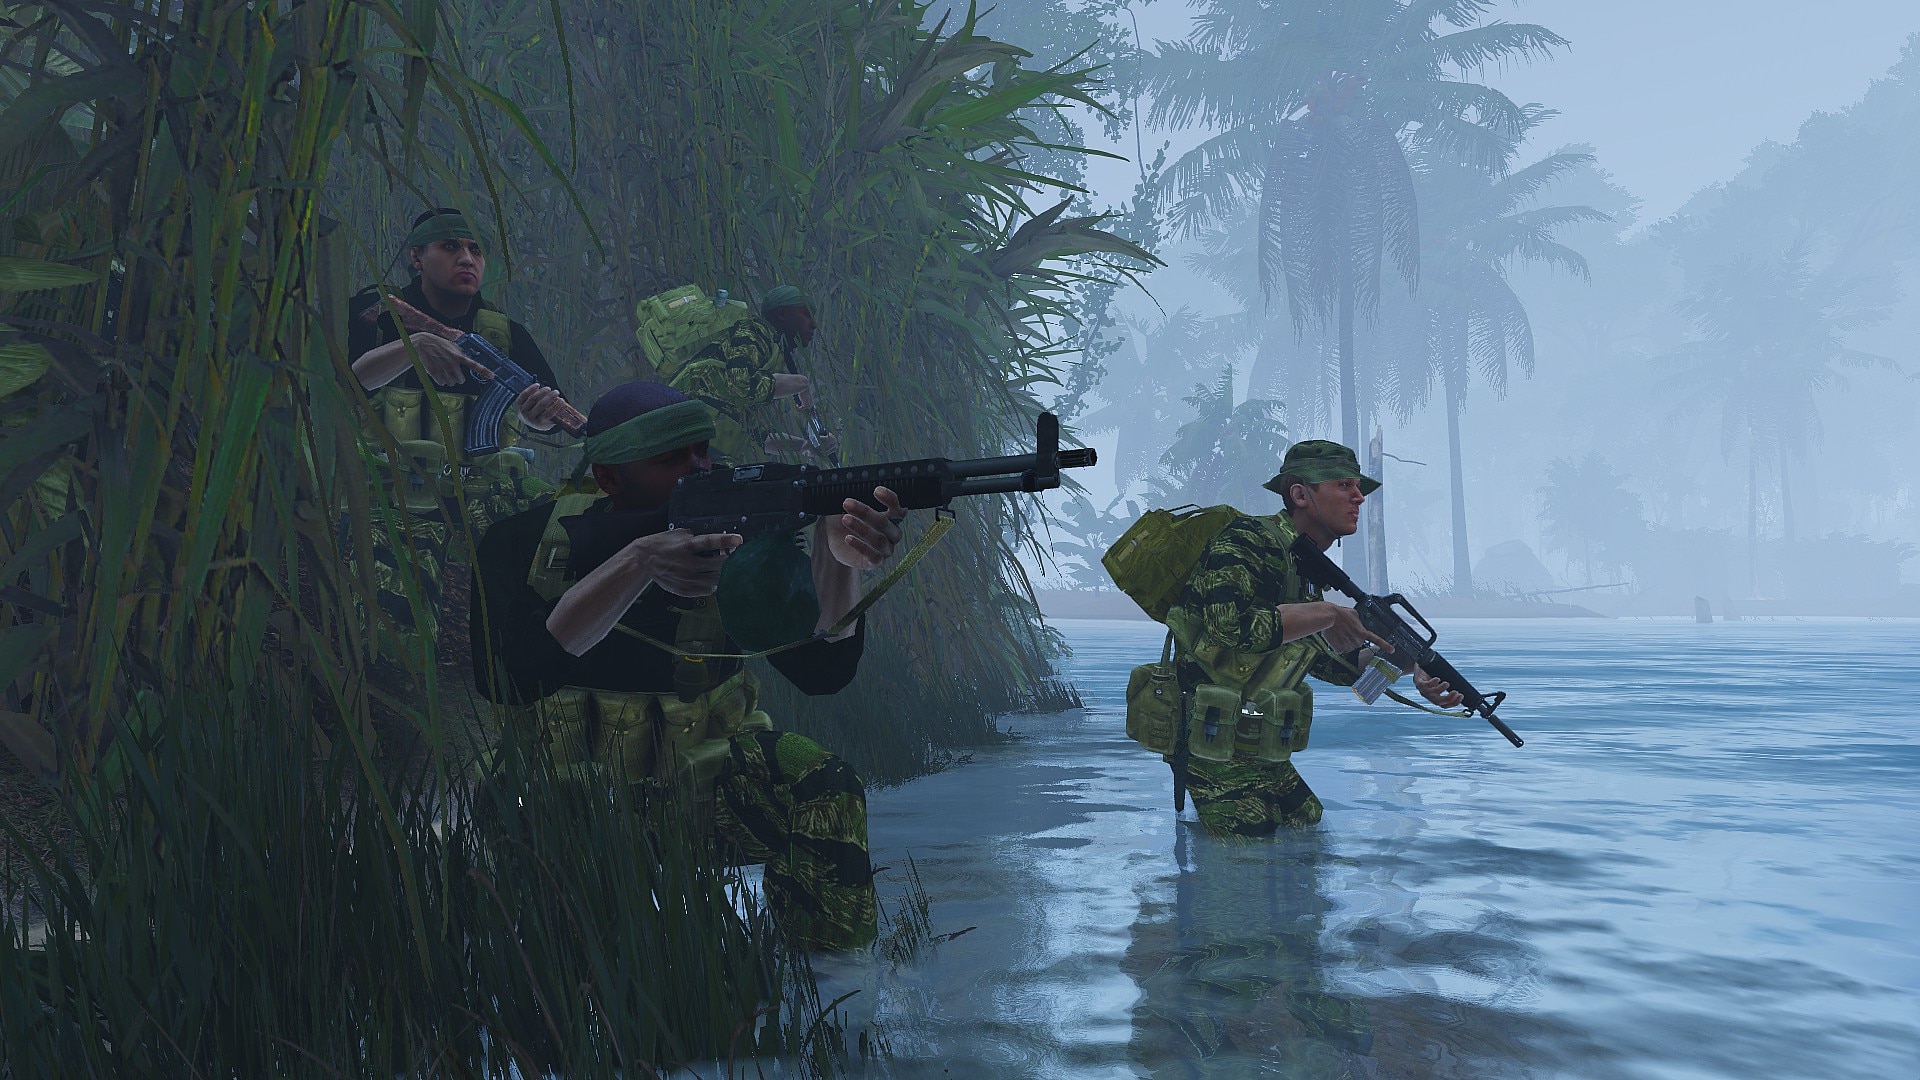 The 10 best Arma 3 mods and missions so far